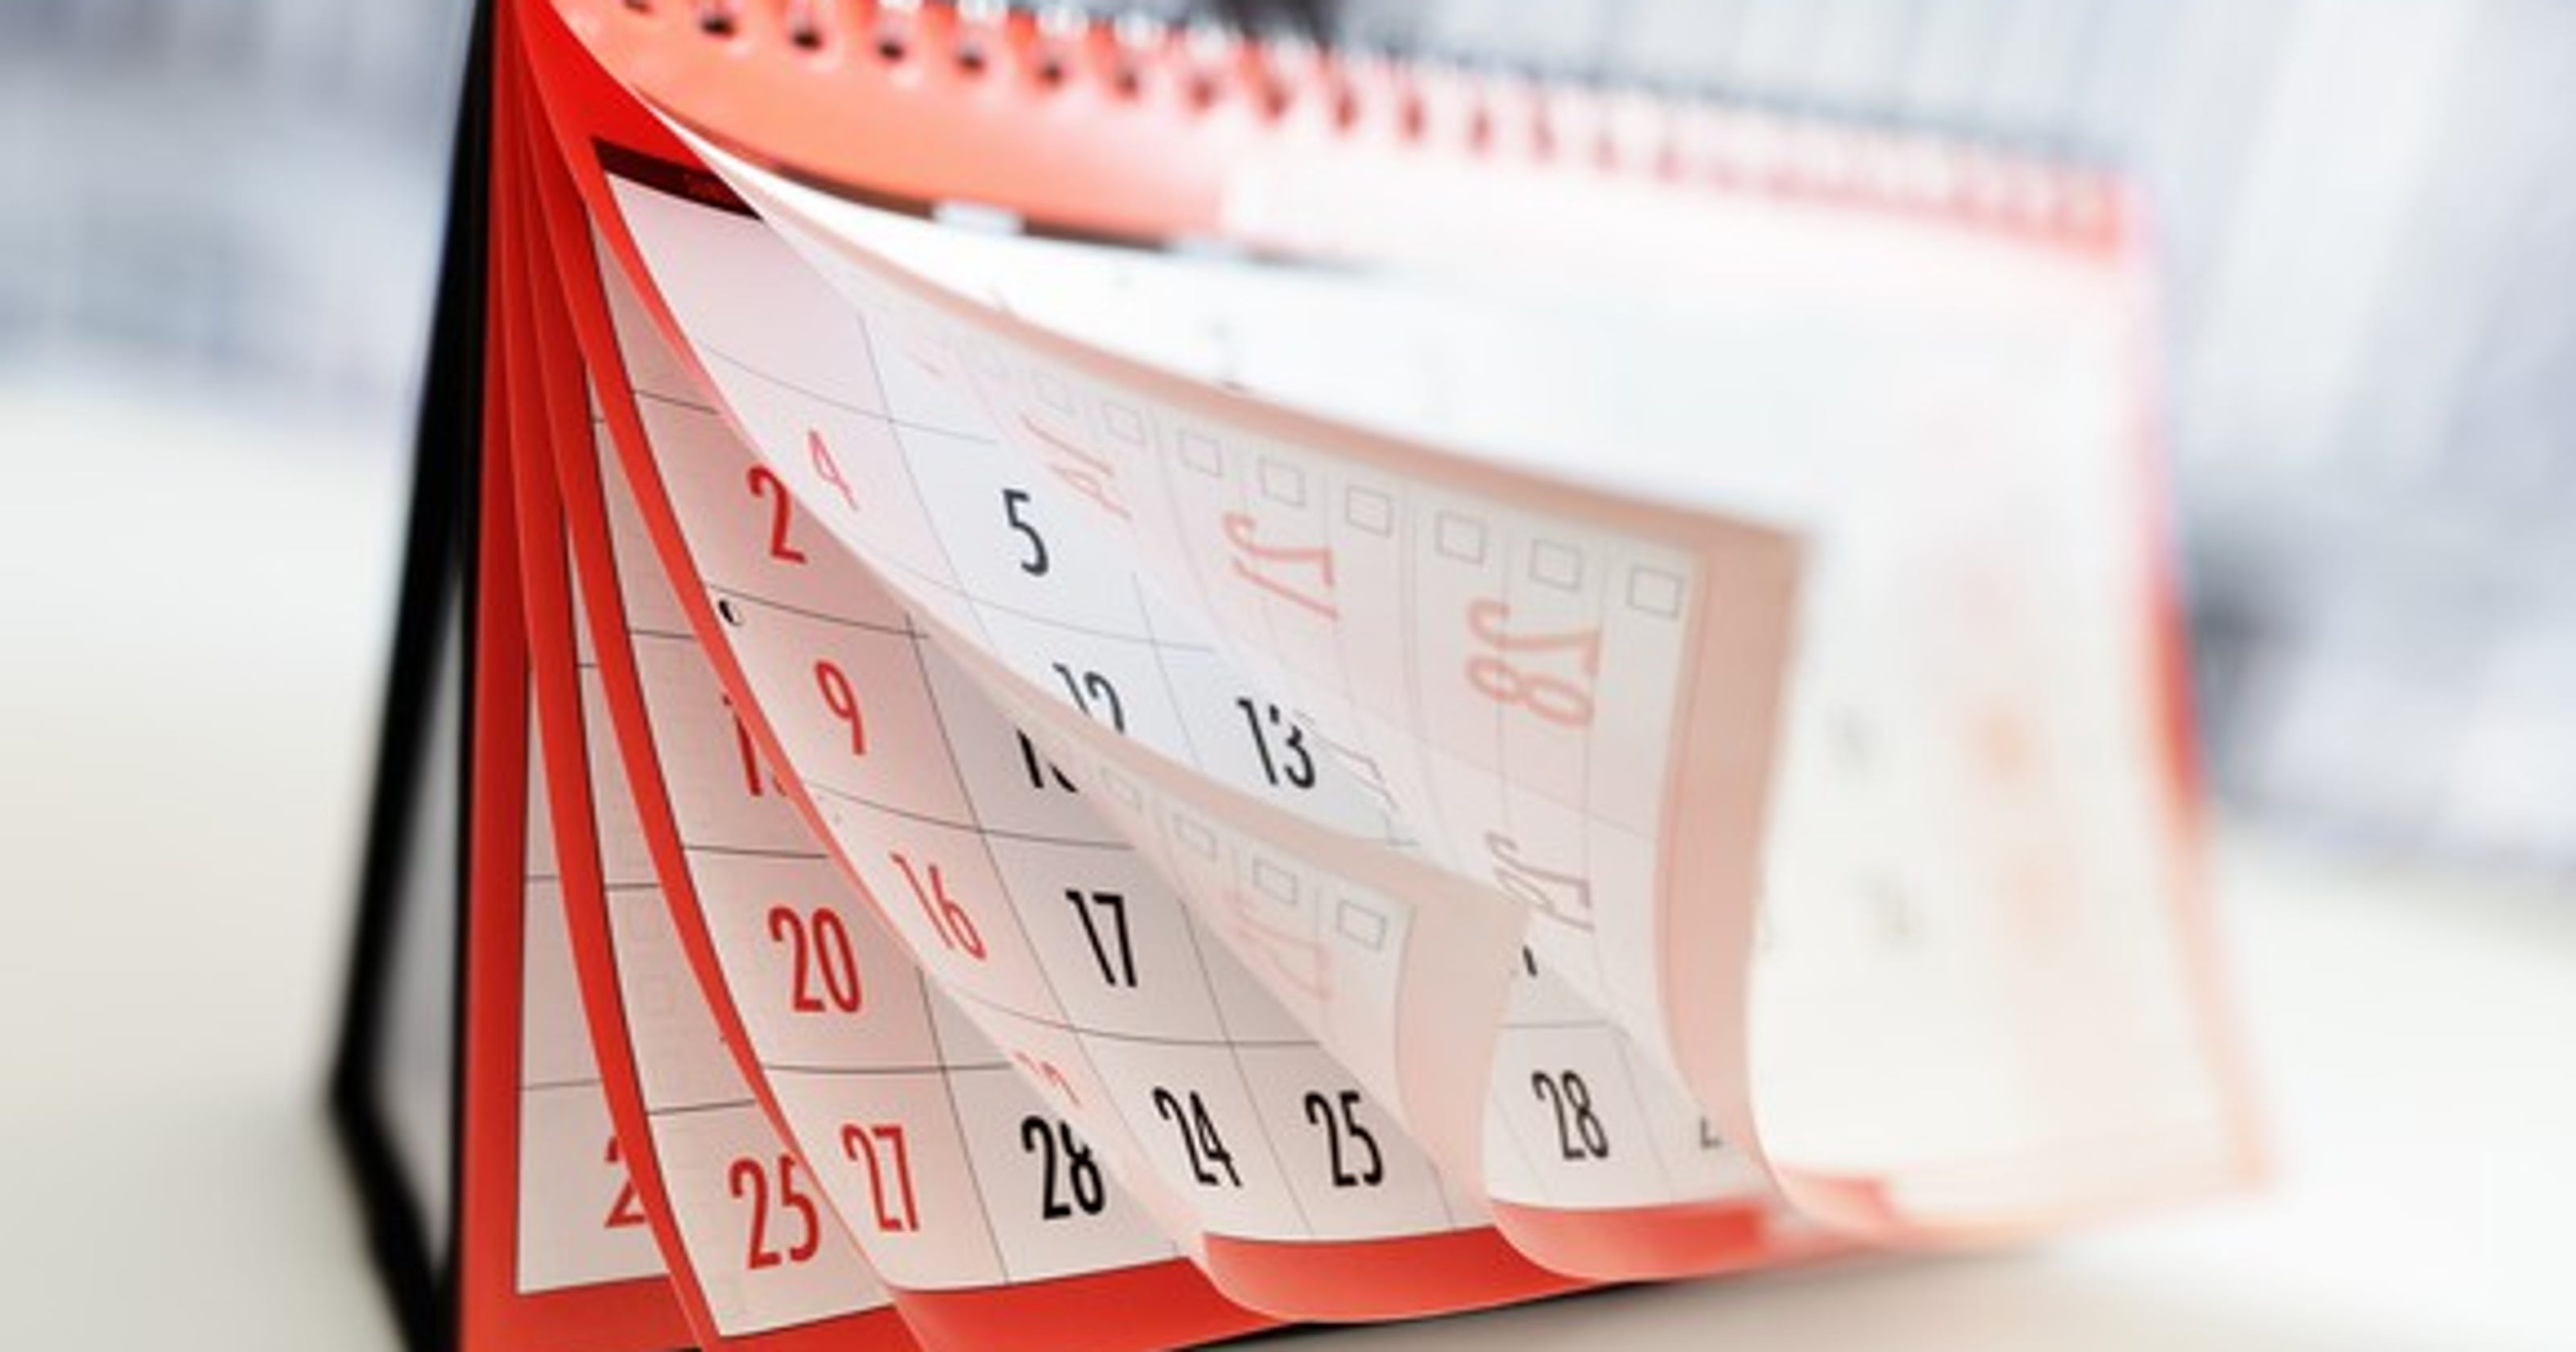 Financial planning calendar How to find, use budget breaks in 2019